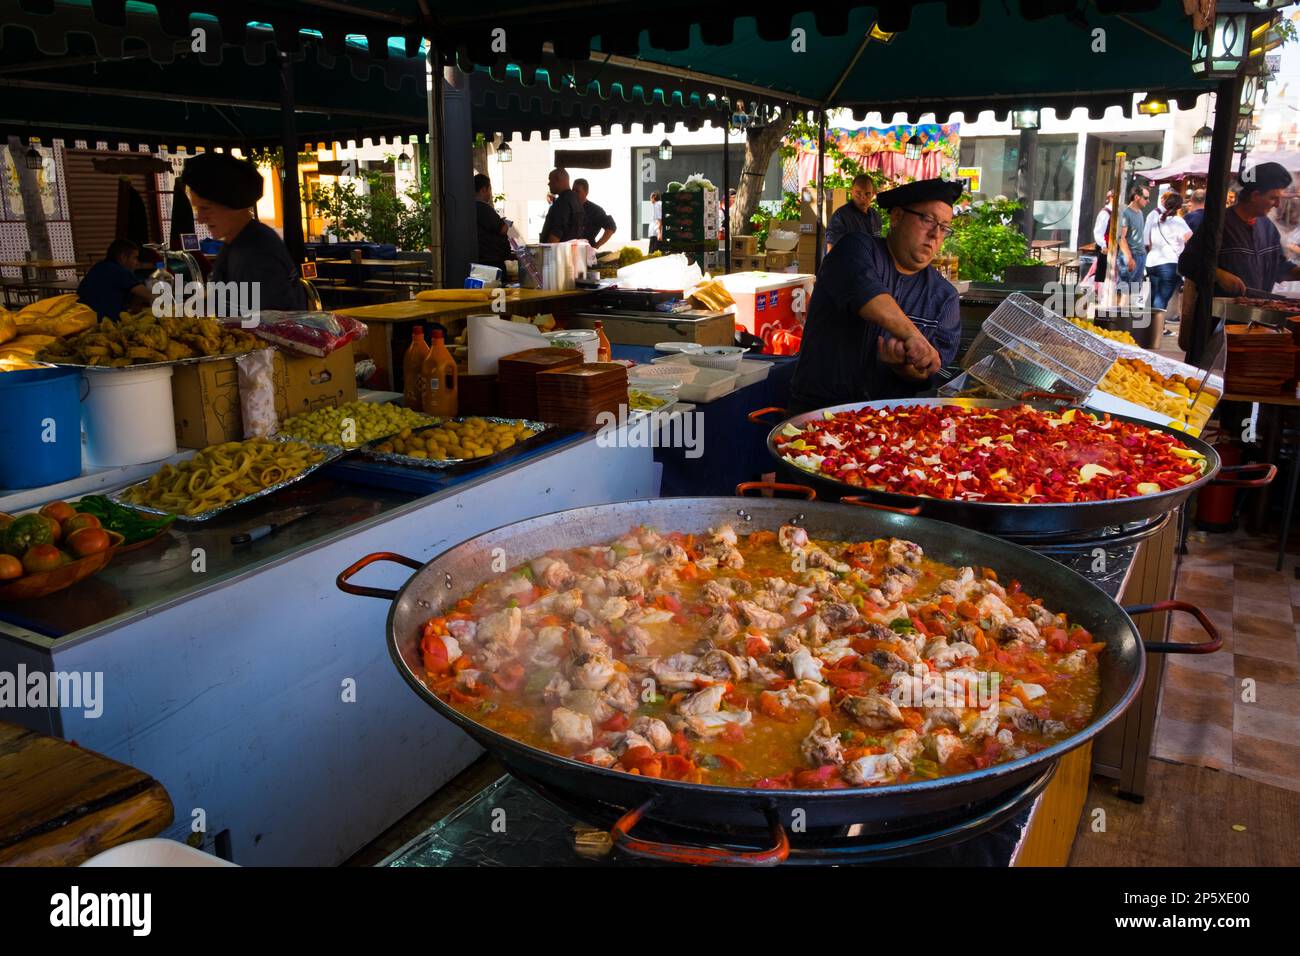 Making Paella at a fiesta in a market in Spain Stock Photo